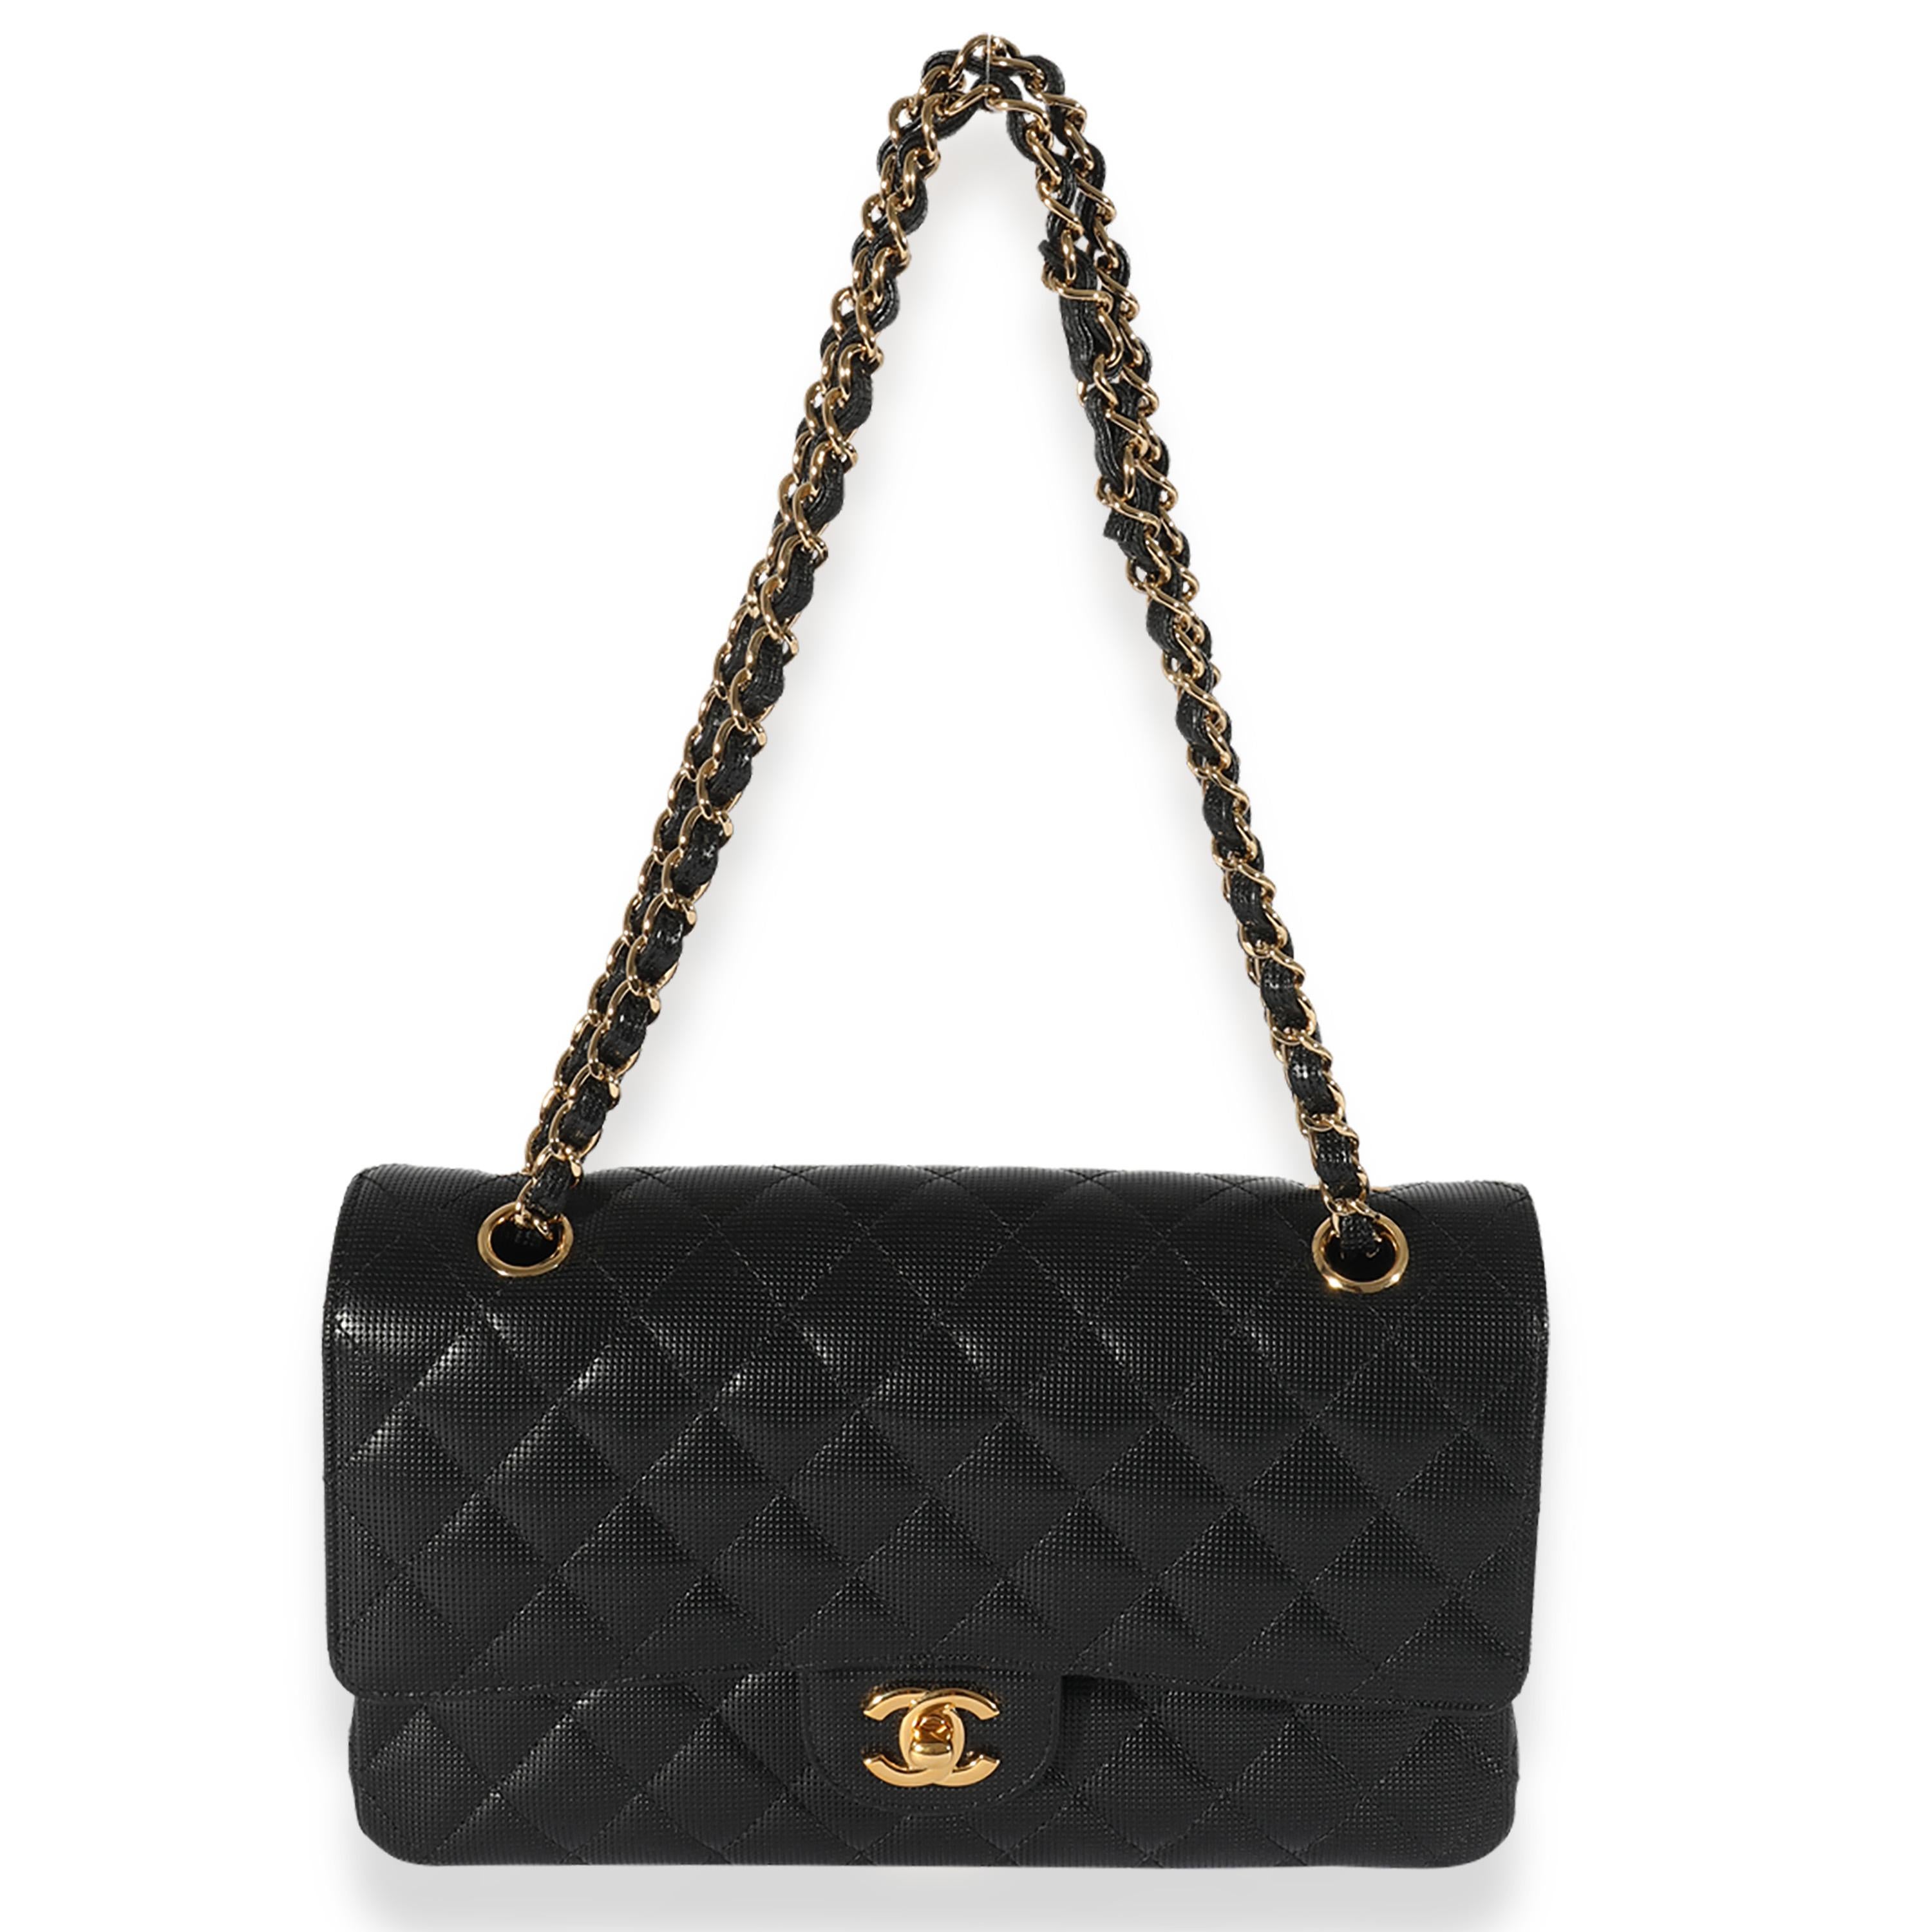 Listing Title: Chanel Black Quilted Perforated Lambskin Medium Classic Double Flap Bag
SKU: 125924

Condition: Pre-owned 
Condition Description: A timeless classic that never goes out of style, the flap bag from Chanel dates back to 1955 and has